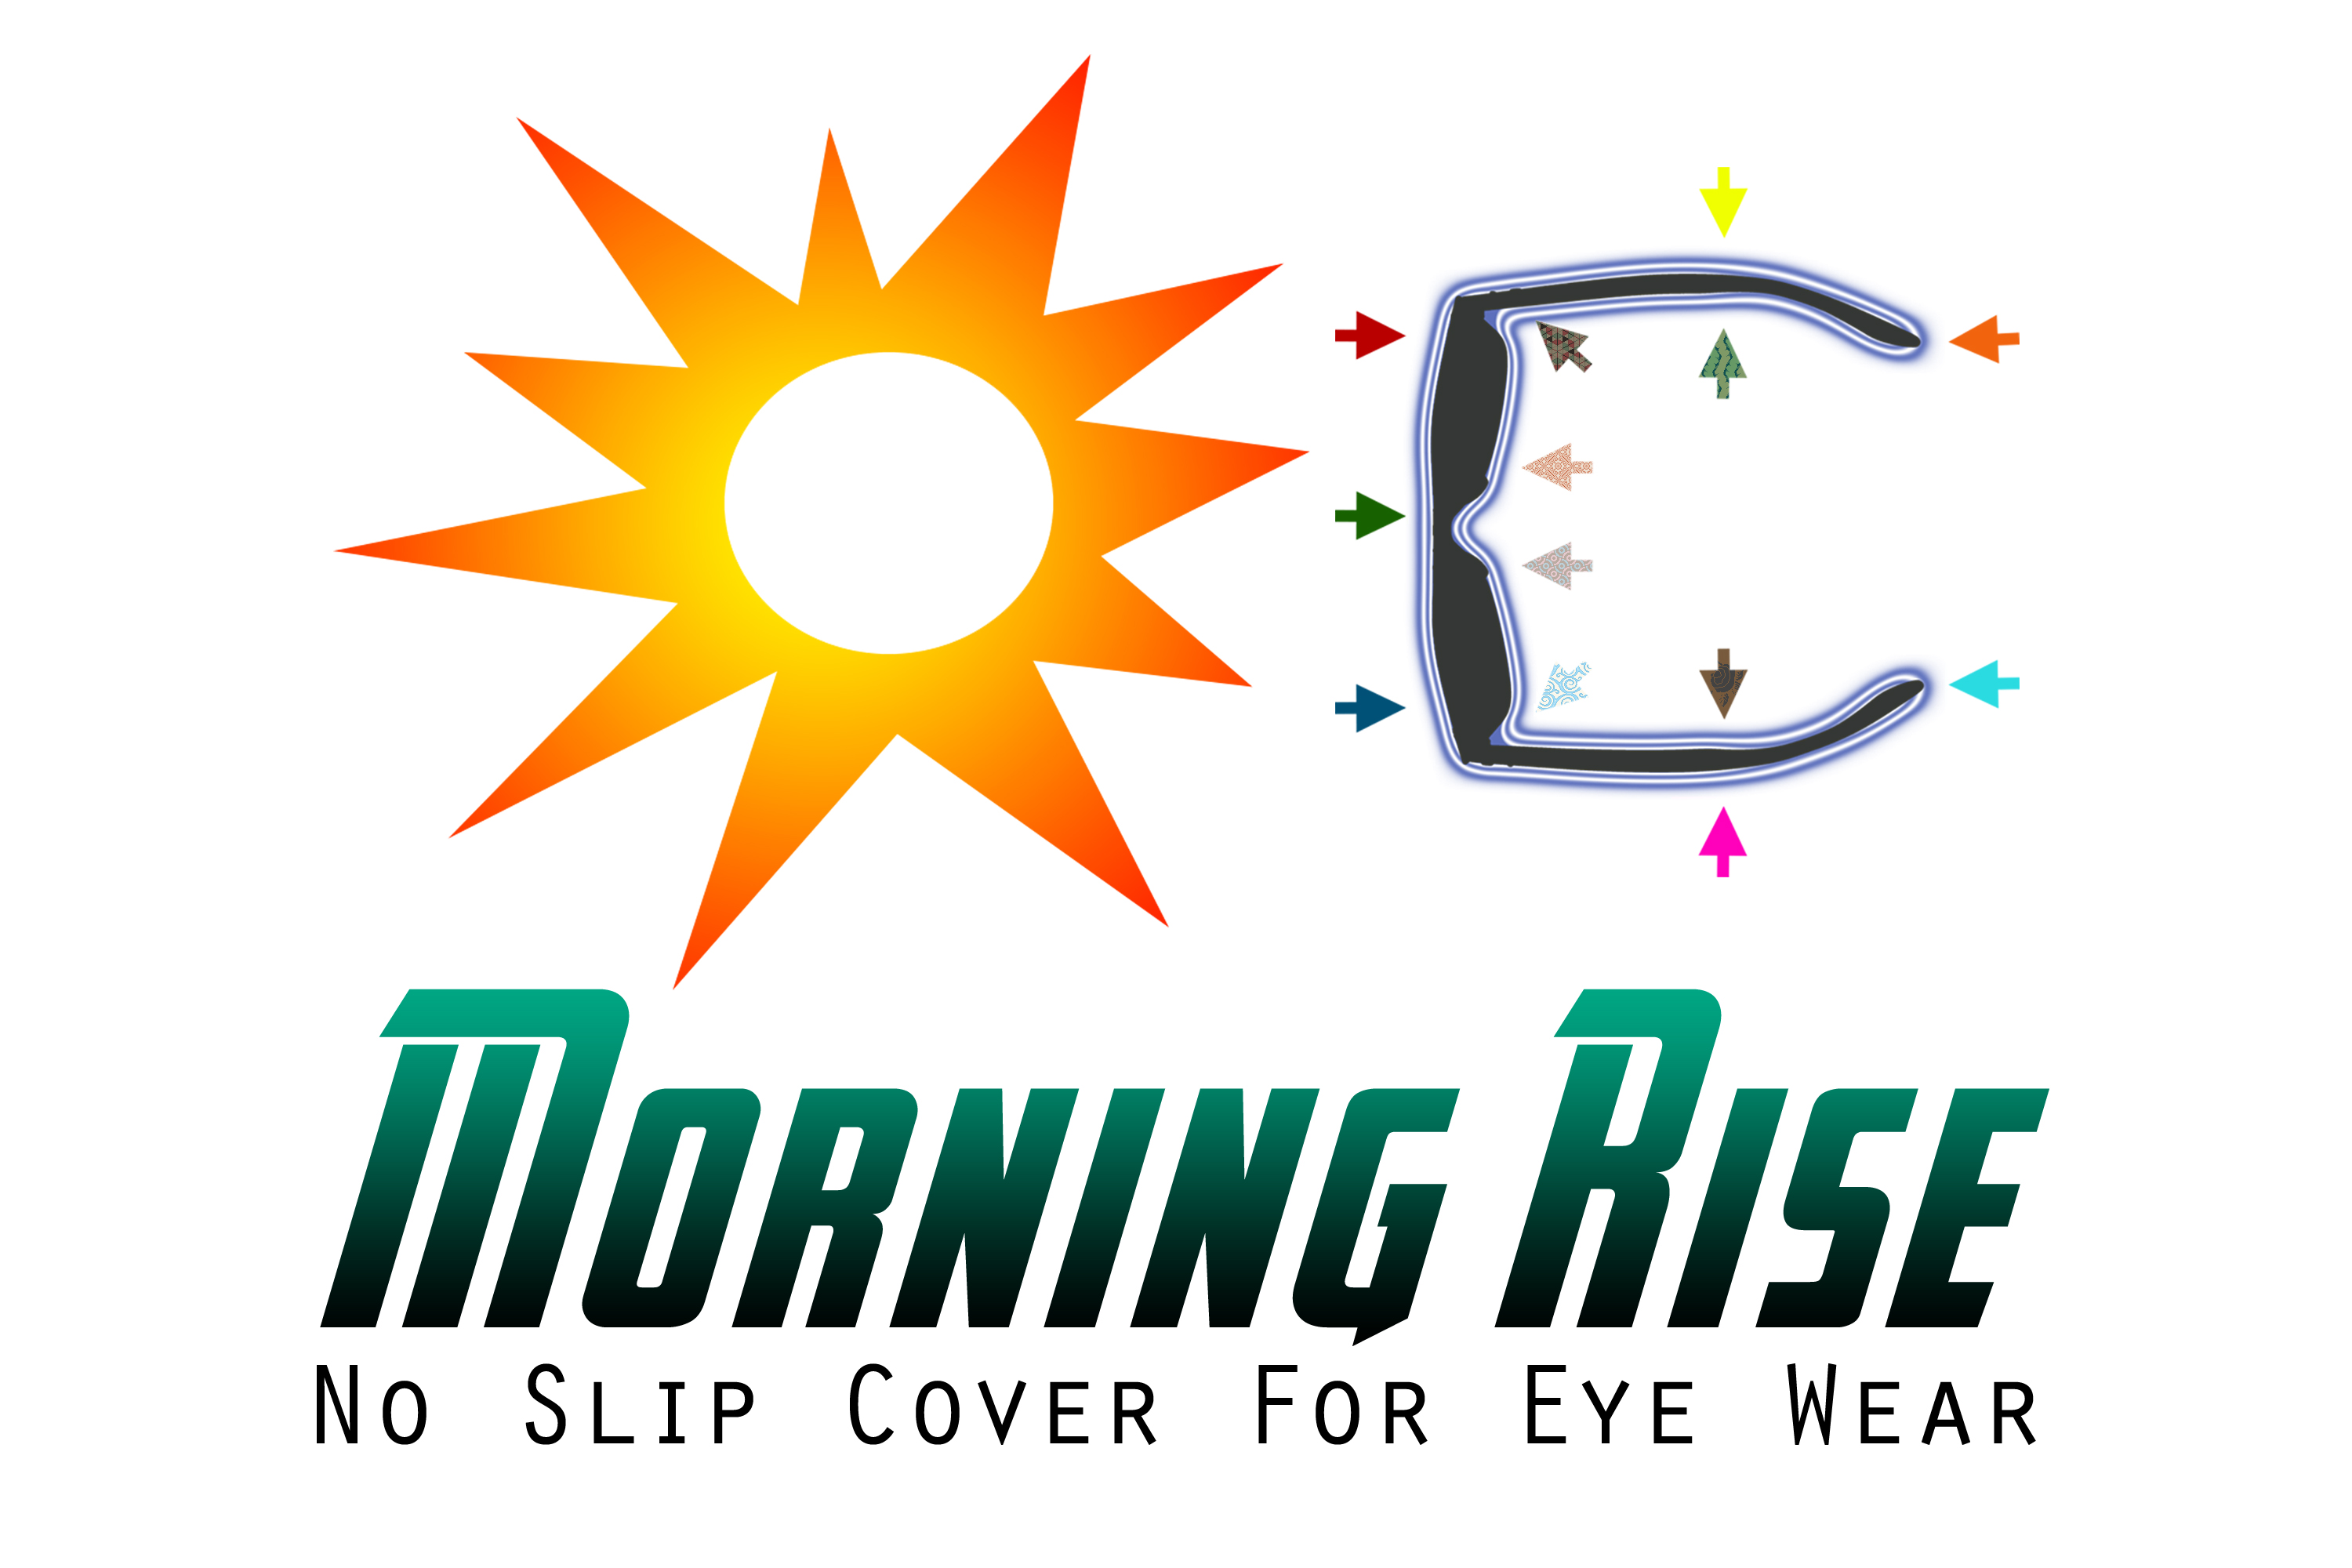 Morning Rise Is The First No Slip Cover For Eyewear!